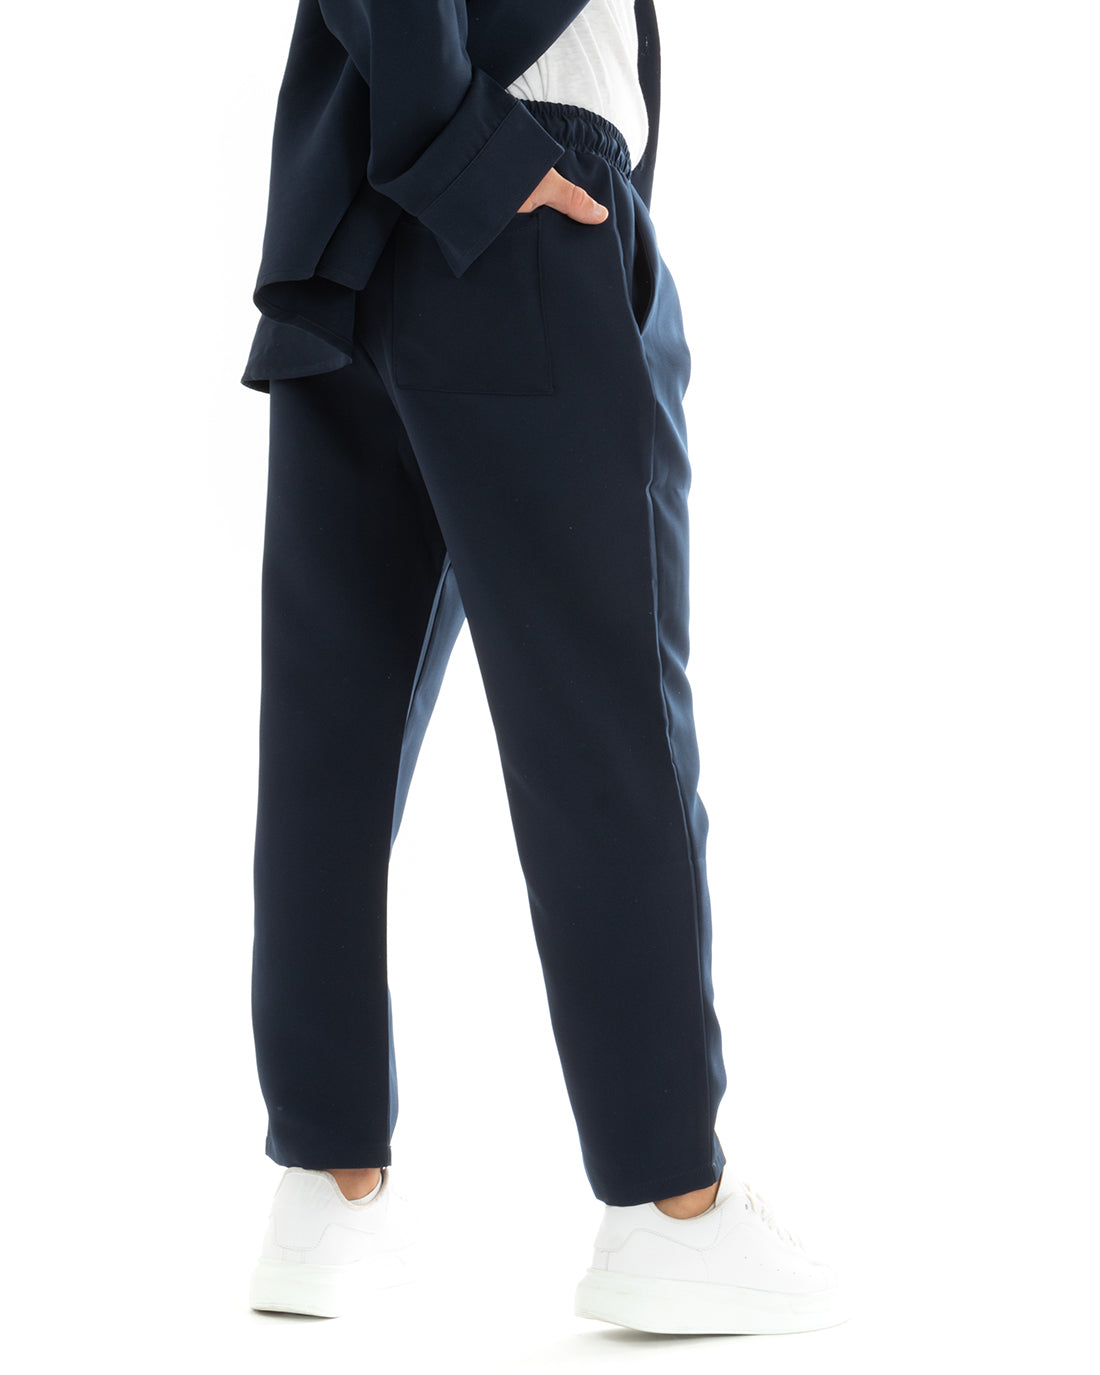 Complete Coordinated Set for Men Viscose Shirt With Collar Trousers Outfit Blue GIOSAL-OU2388A